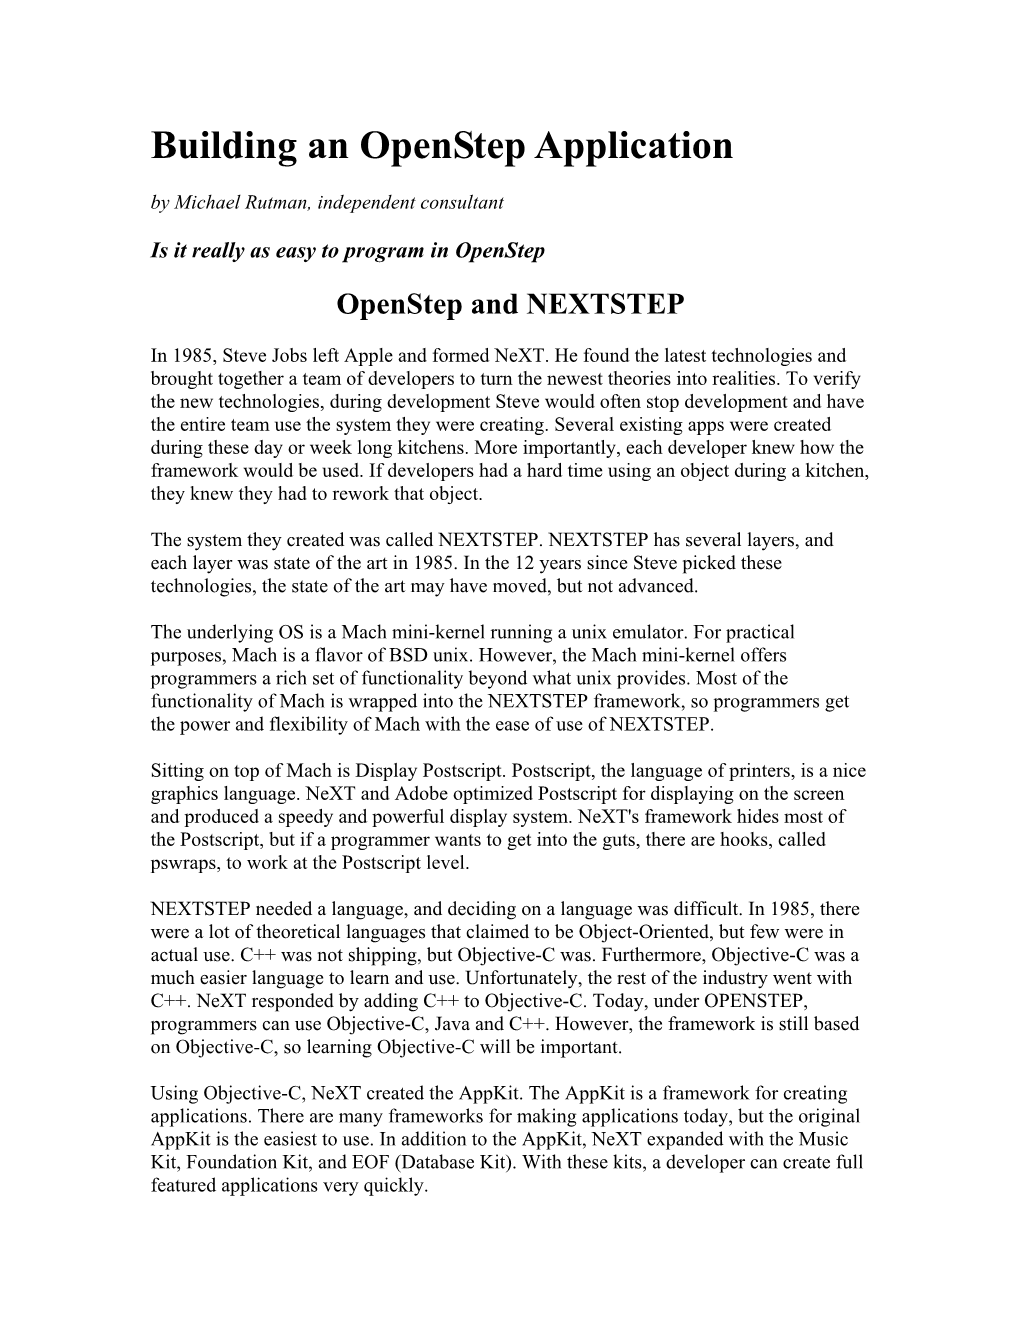 Building an Openstep Application by Michael Rutman, Independent Consultant